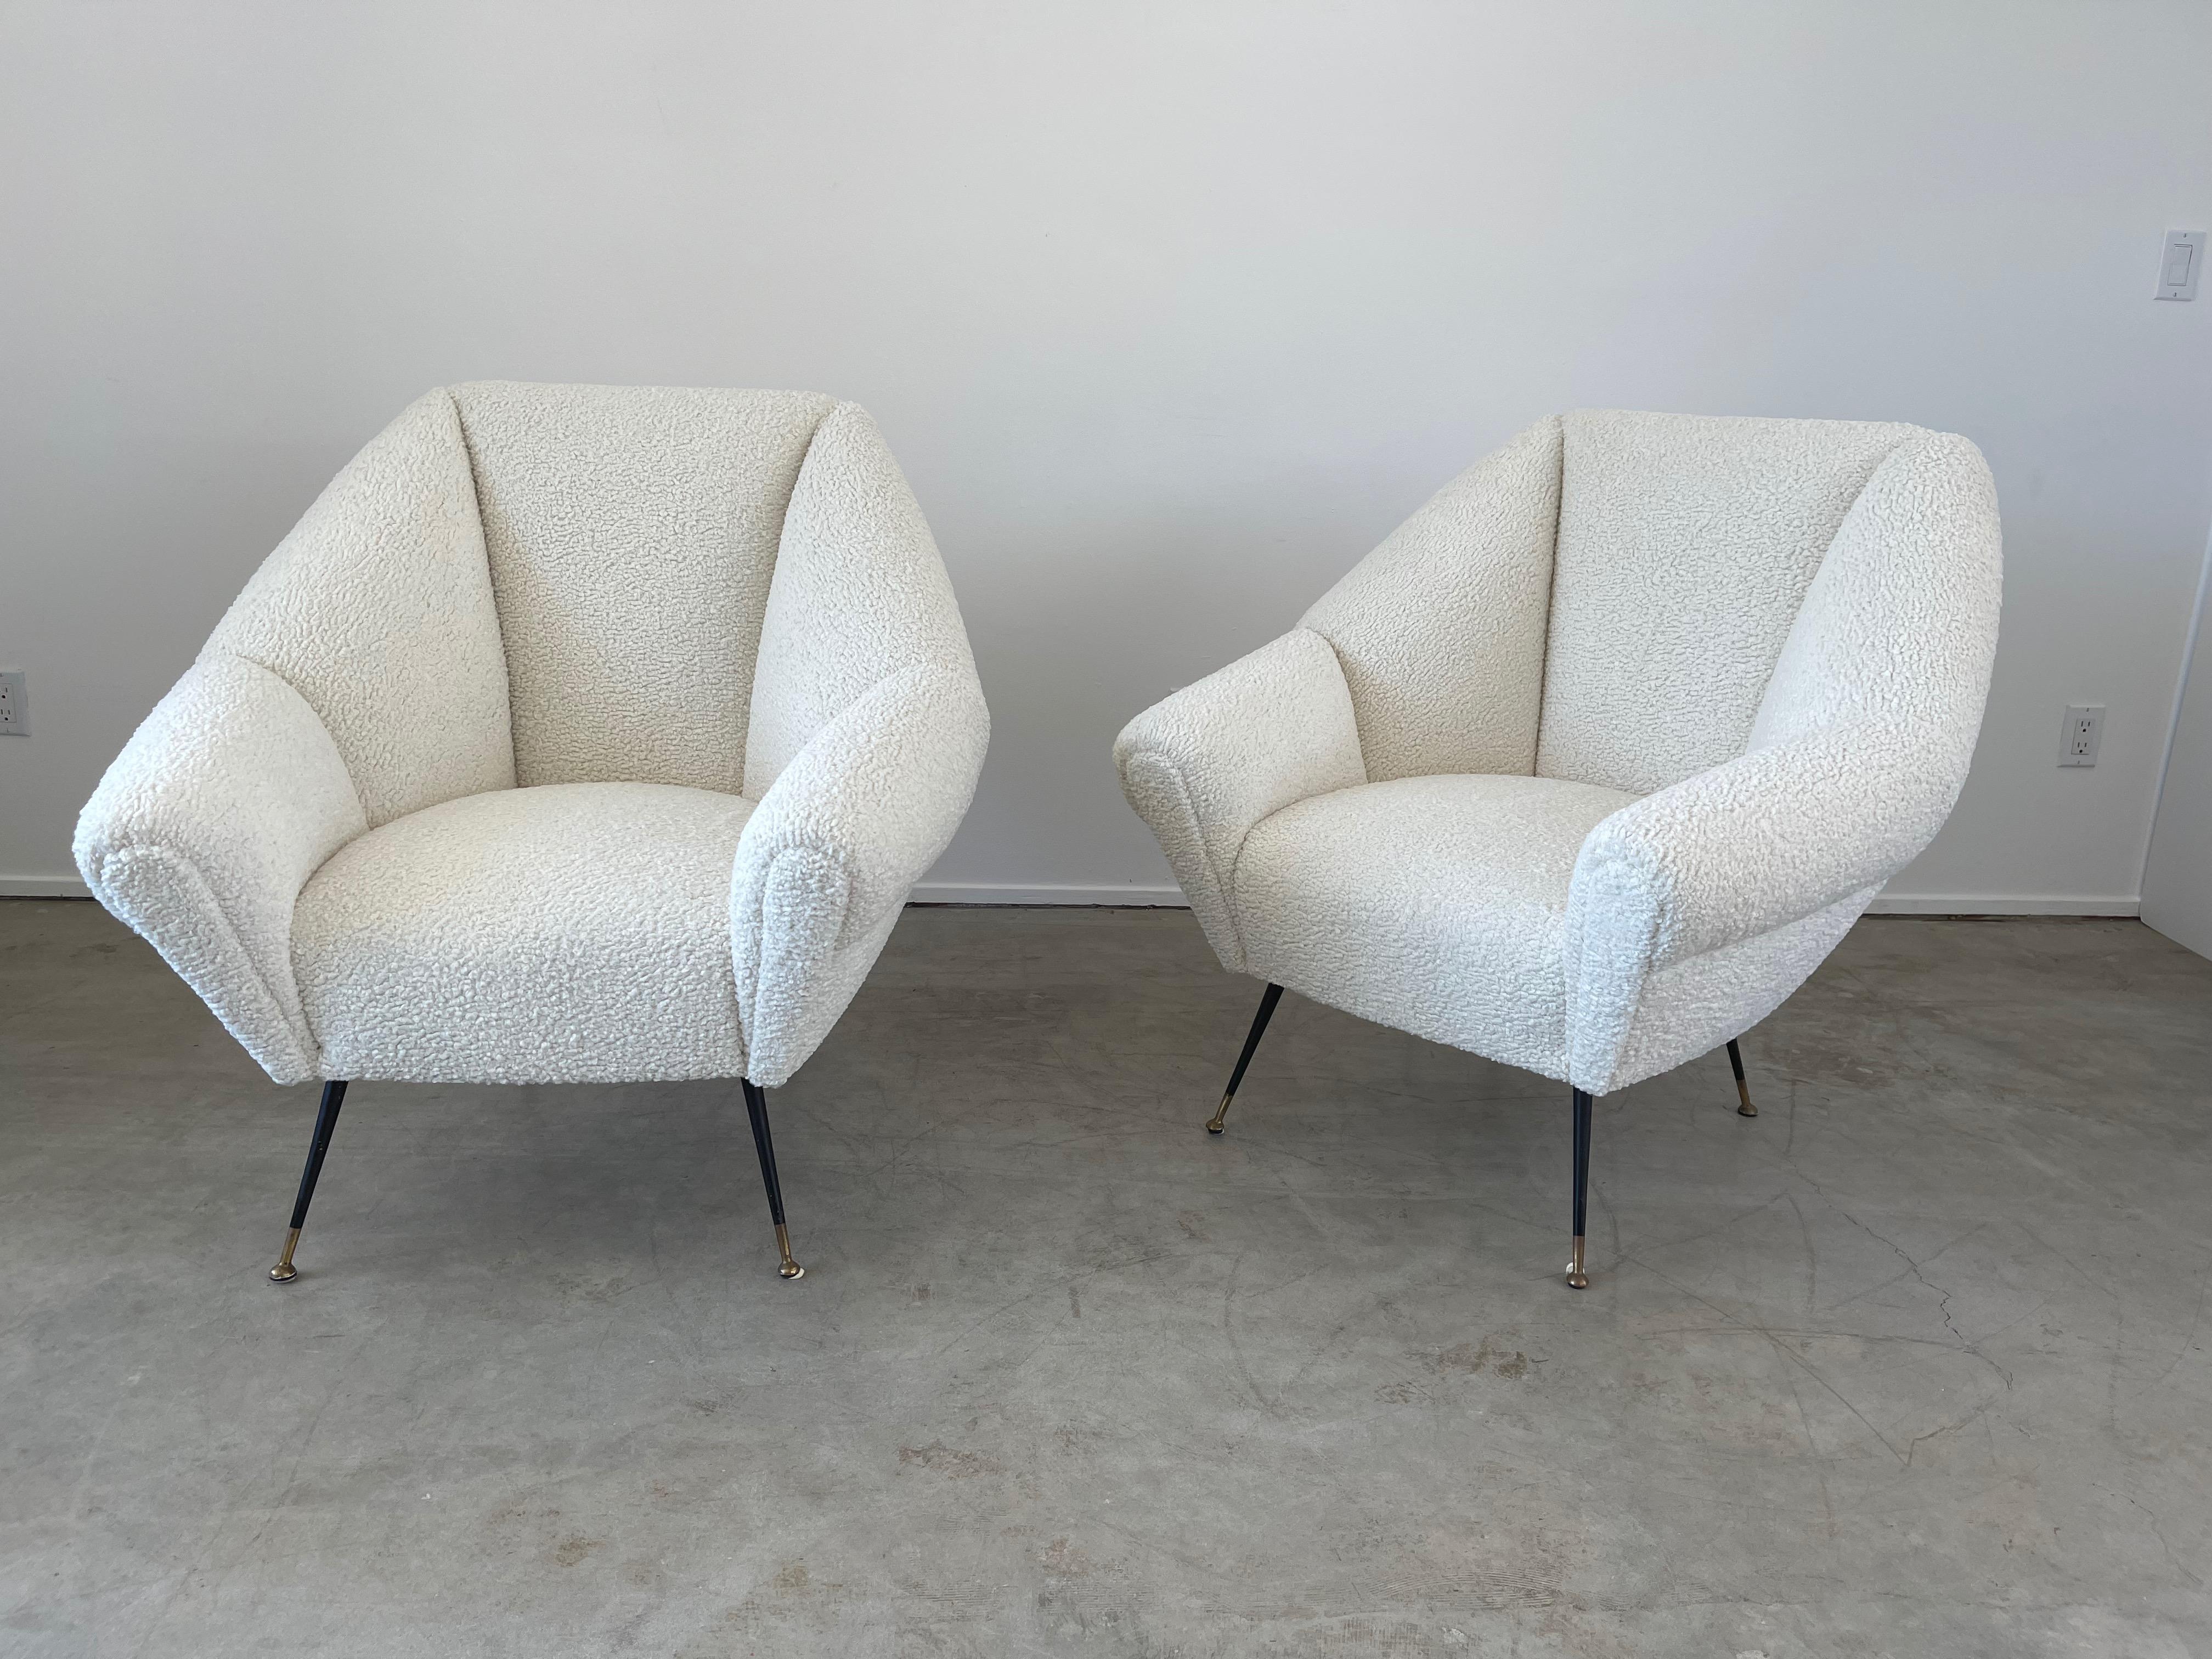 Wonderful pair of newly upholstered Italian chairs attributed to Gigi Radice 
Great sculptural shape and large in scale
Iron and brass legs - new shearling -like boucle upholstery.